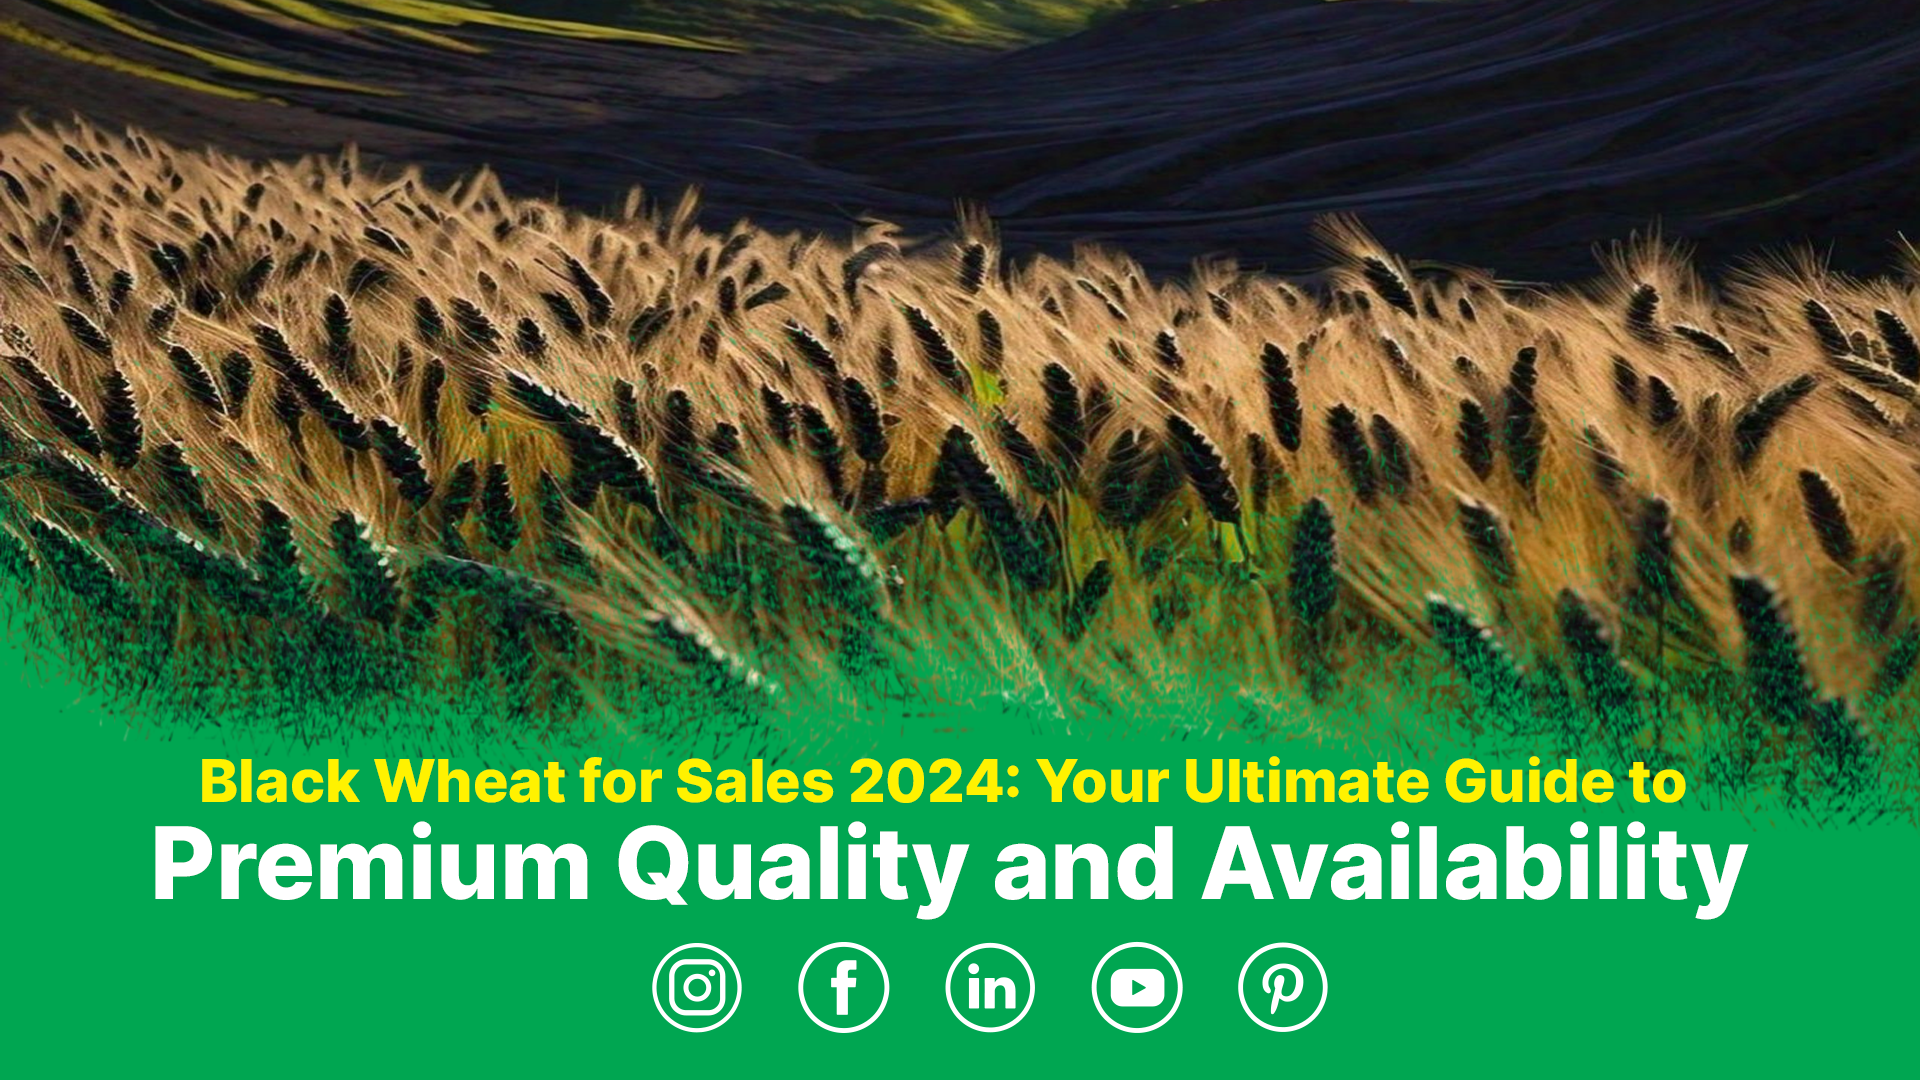 Black Wheat for Sales 2024: Your Ultimate Guide to Premium Quality and Availability